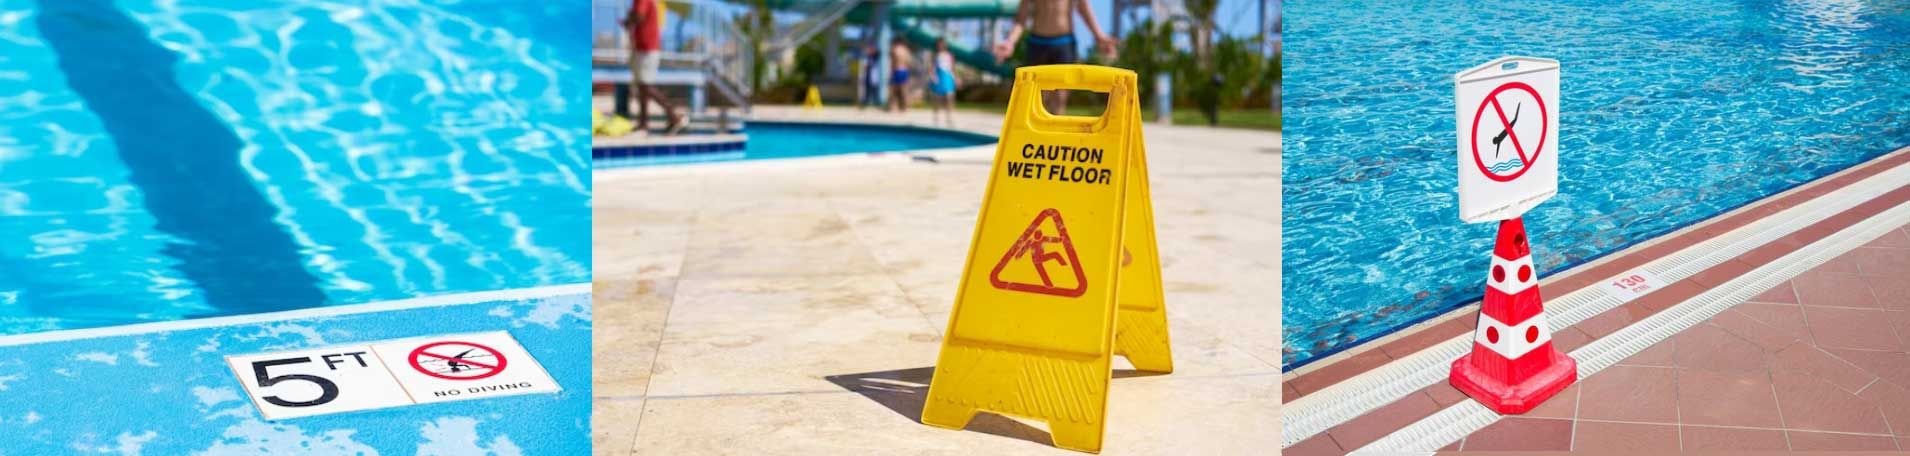 swimming pool safety sign